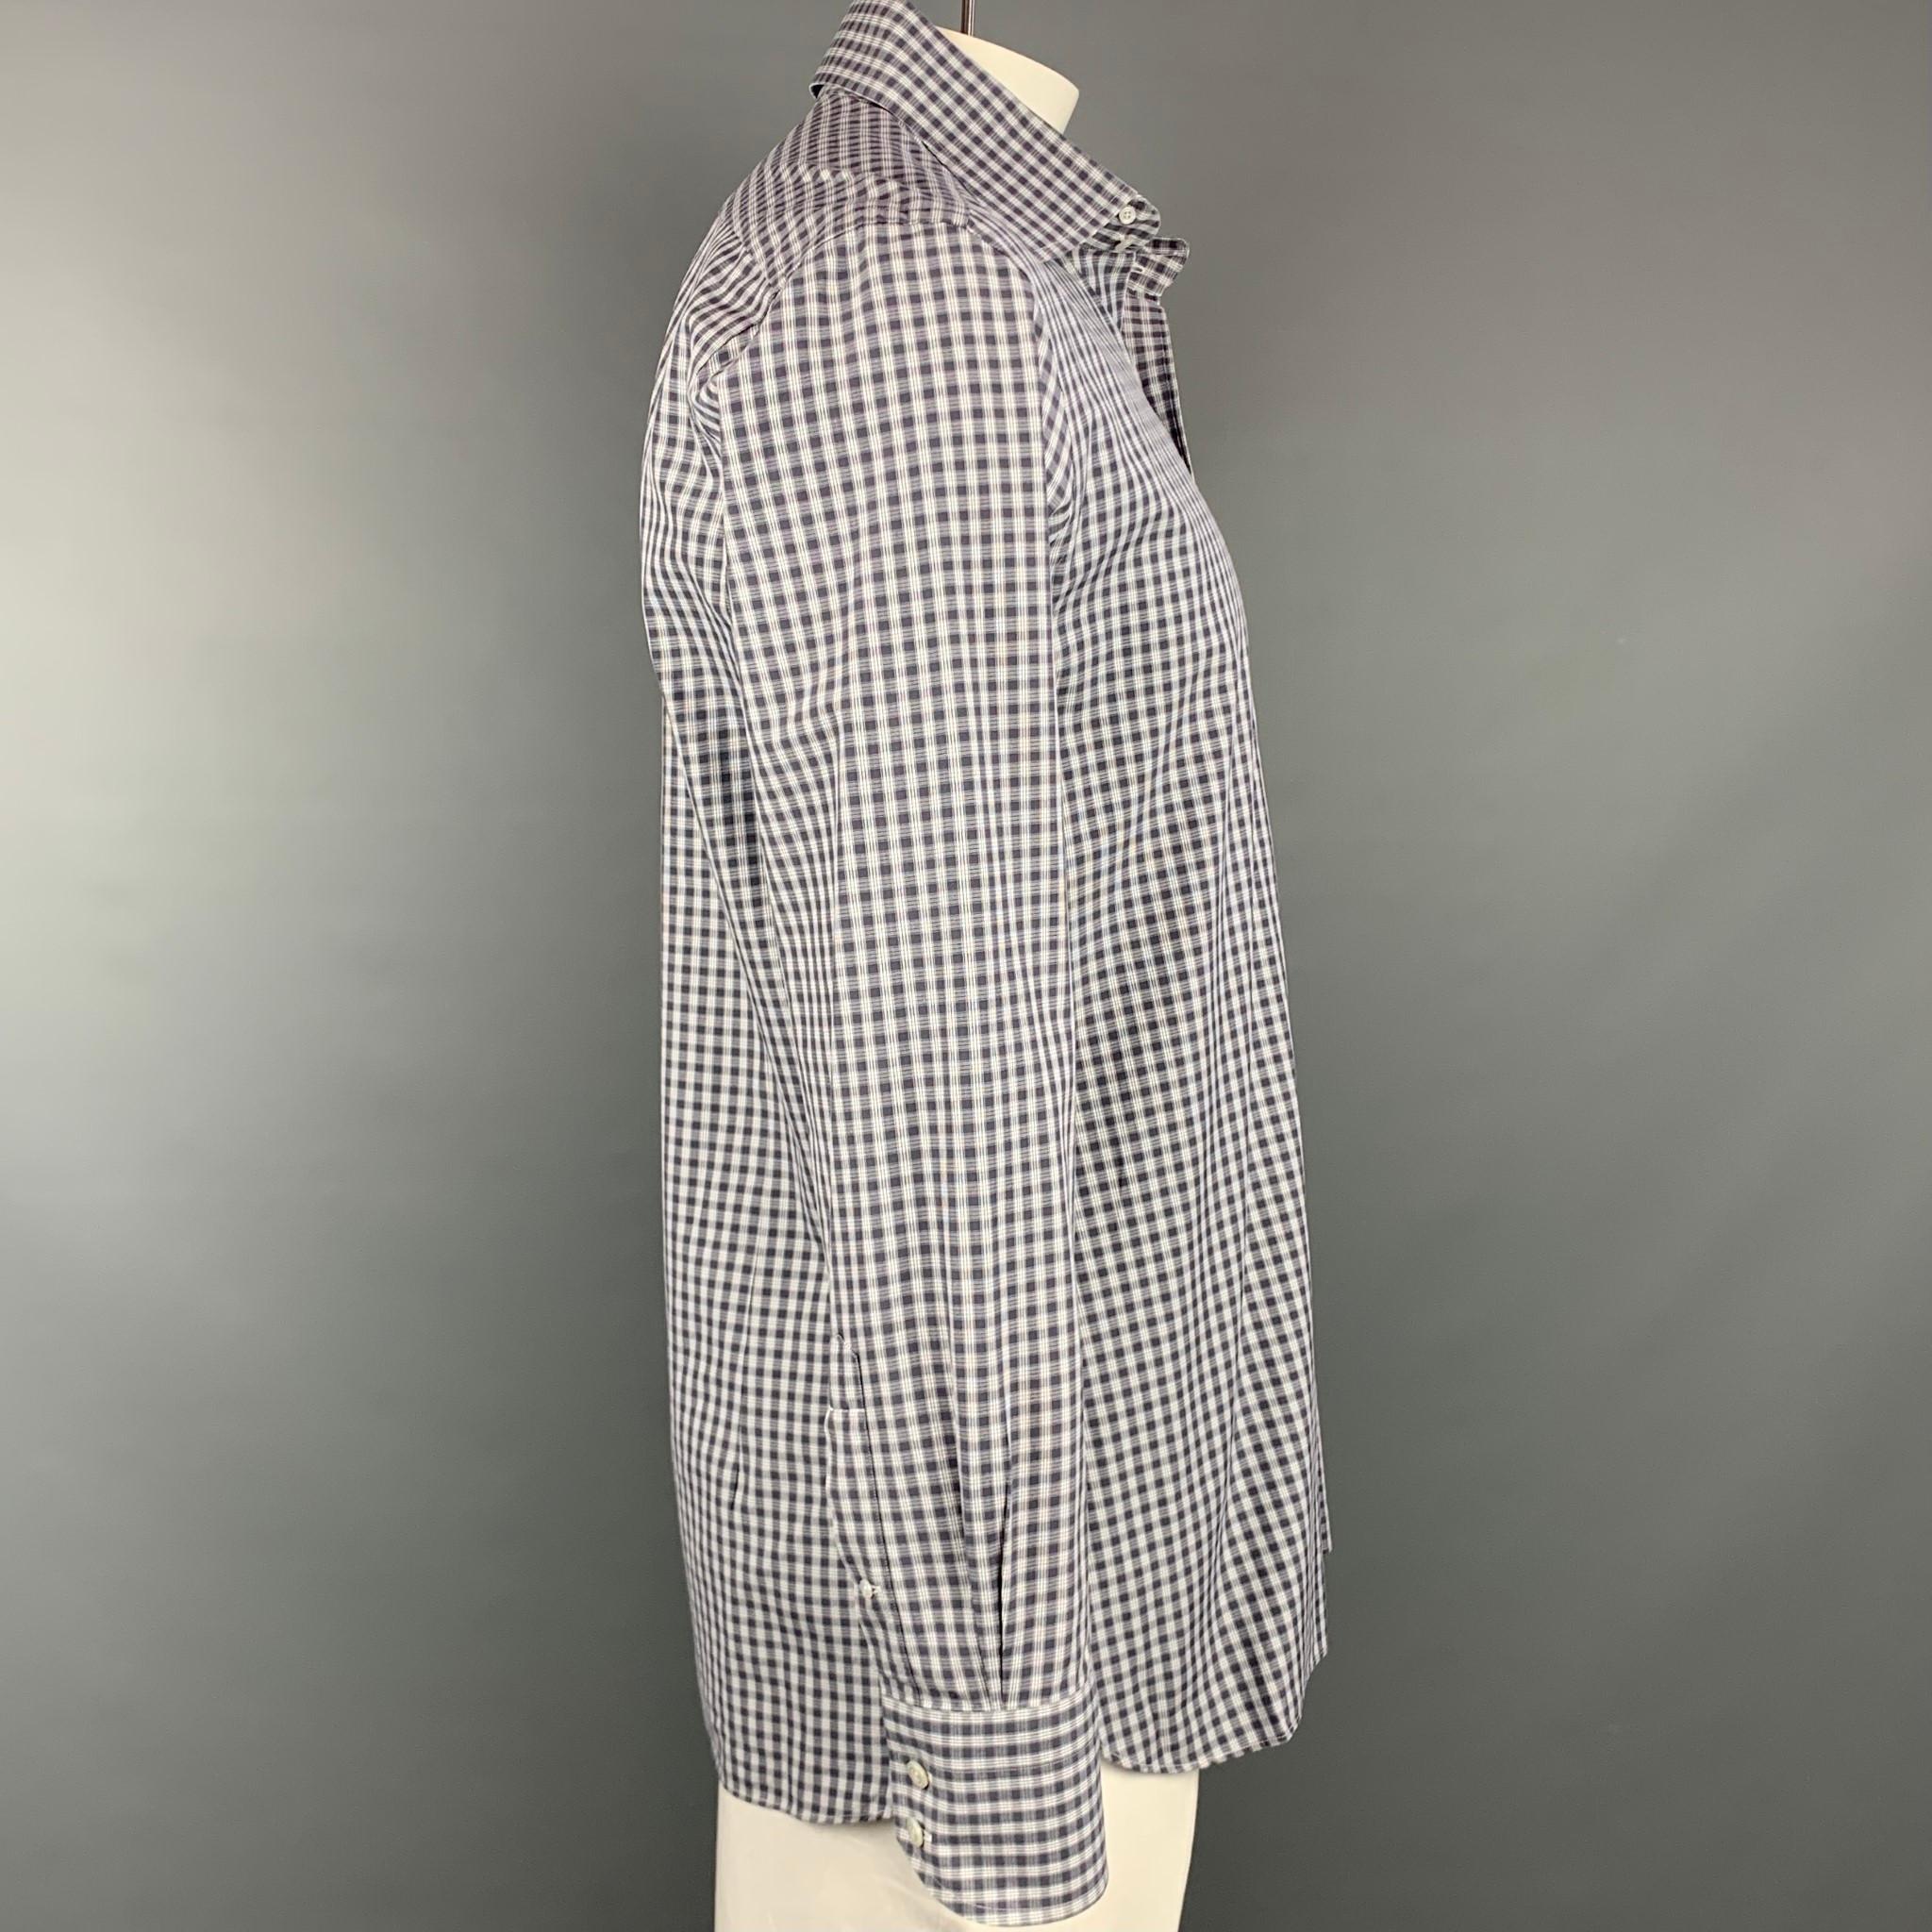 TOM FORD long sleeve shirt comes in a grey & white plaid cotton featuring a button up style and a spread collar. Made in Italy.

Very Good Pre-Owned Condition.
Marked: 44/ 17.5

Measurements:

Shoulder: 19.5 in.
Chest: 46 in.
Sleeve: 27 in.
Length: